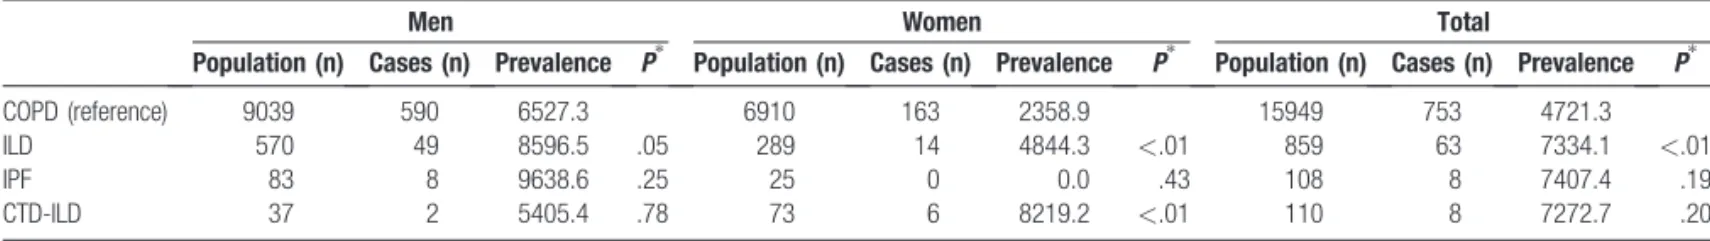 Figure 1. Male-to-female lung cancer prevalence rates between the groups.